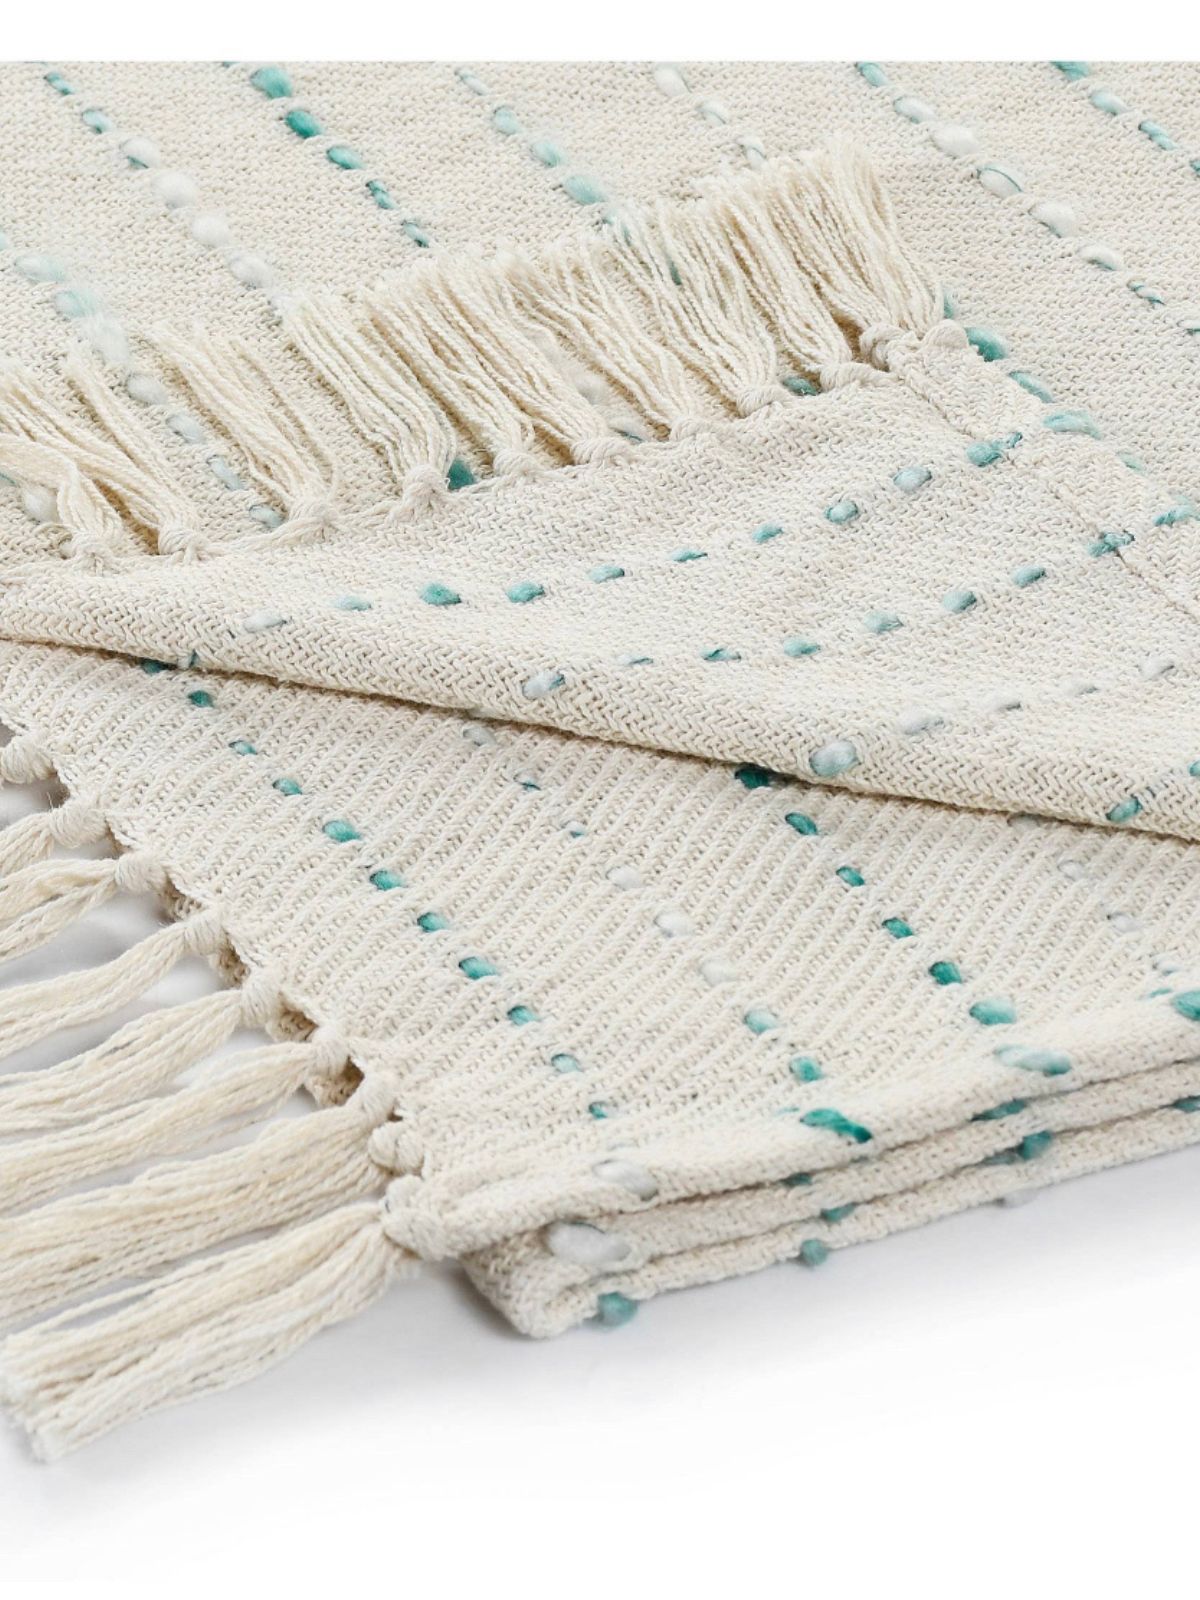 Teal Stripe Woven Cotton Throw Blanket with Fringe Sold by KYA Home Decor.